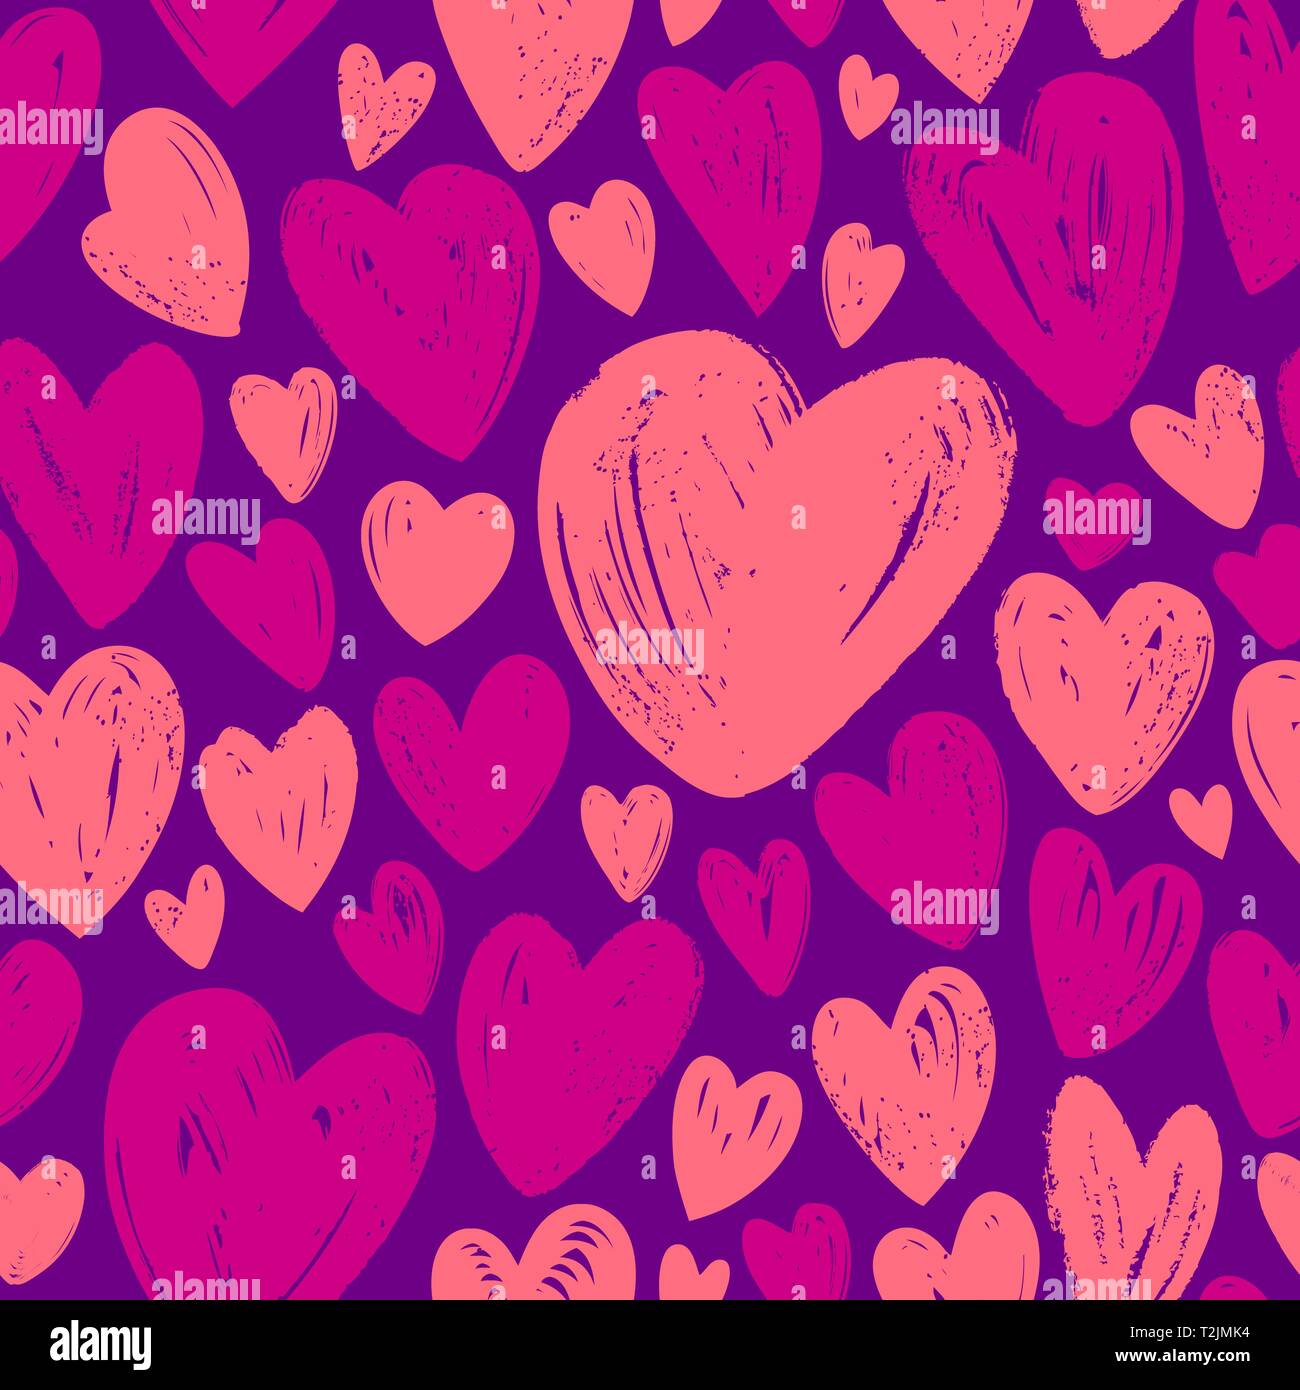 Hearts, seamless background. Love hand drawn vector illustration Stock Vector